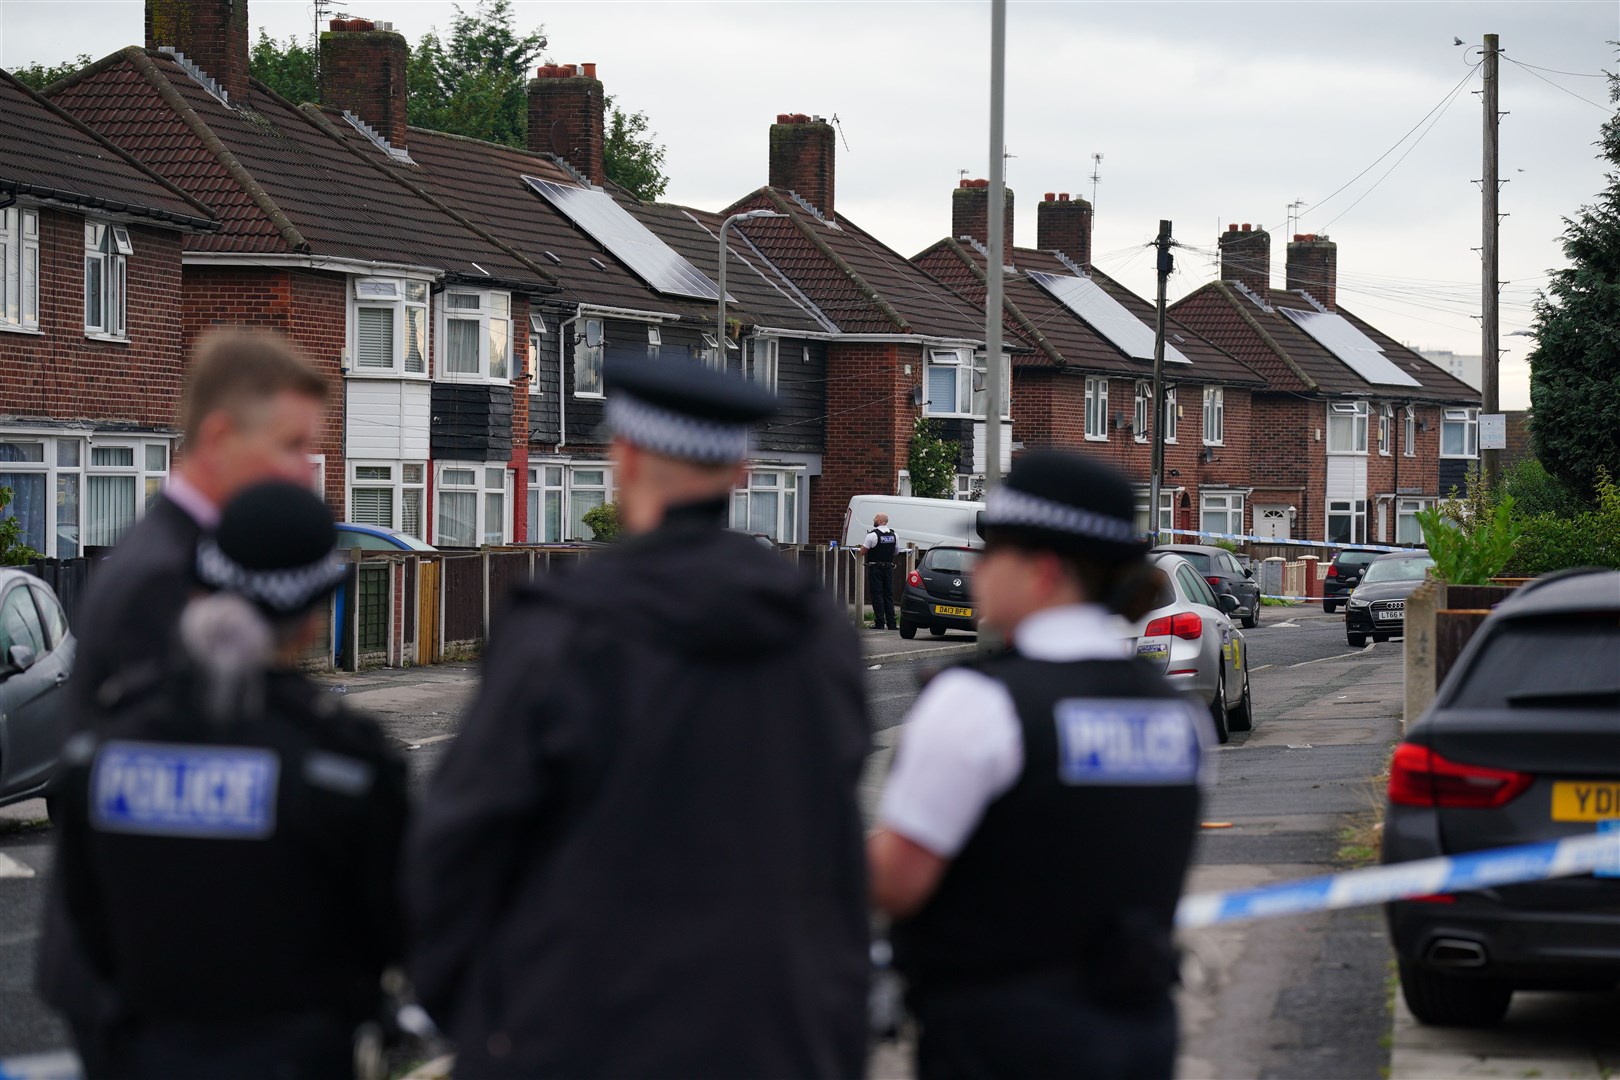 Police at the scene of the incident in Knotty Ash (Peter Byrne/PA)